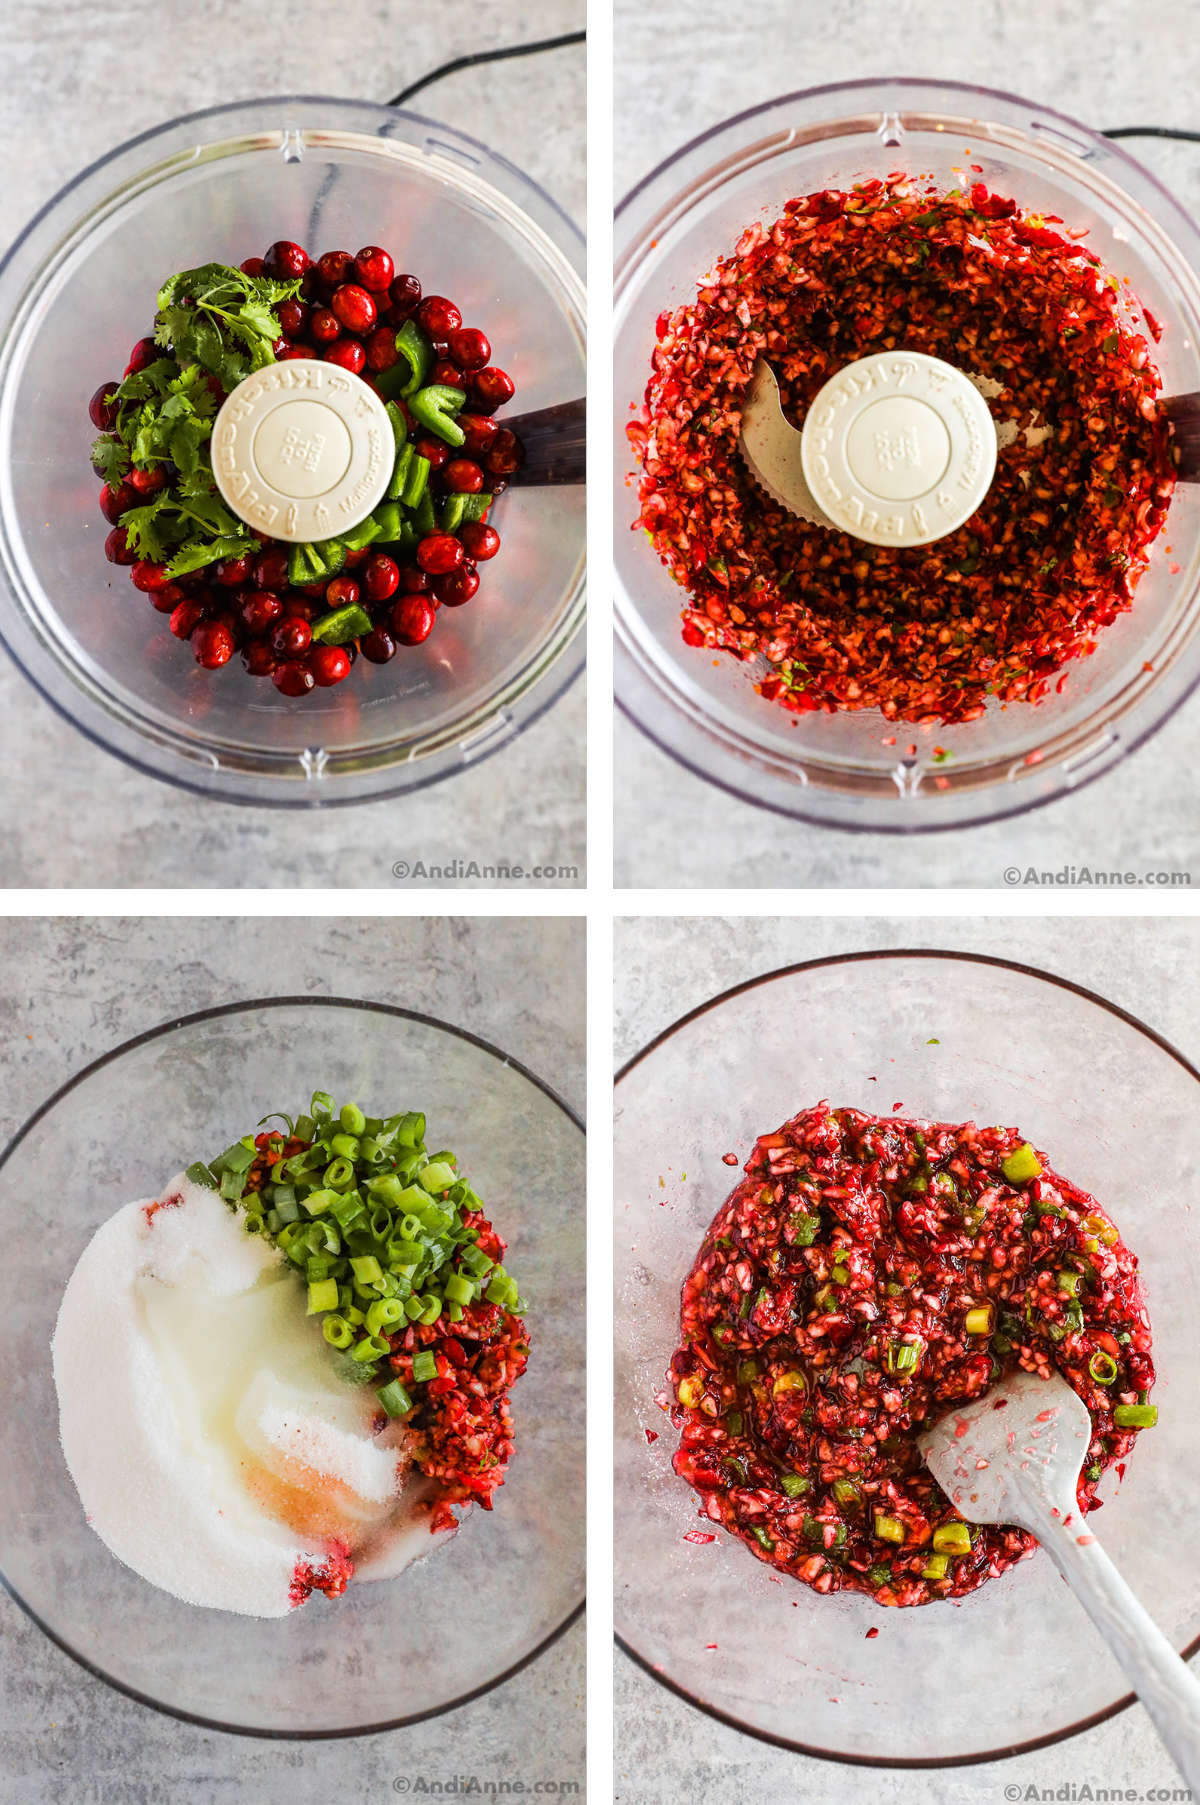 4 overhead view images in one: 1. Cranberries, cilantro and jalapenos added to food processor. 2. Ingredients are pulsed into small pieces. 3. Onions, sugar, lemon and salt are added to a bowl along with the cranberry, jalapeno and cilantro. 4. All ingredients are mixed with a spatula. 